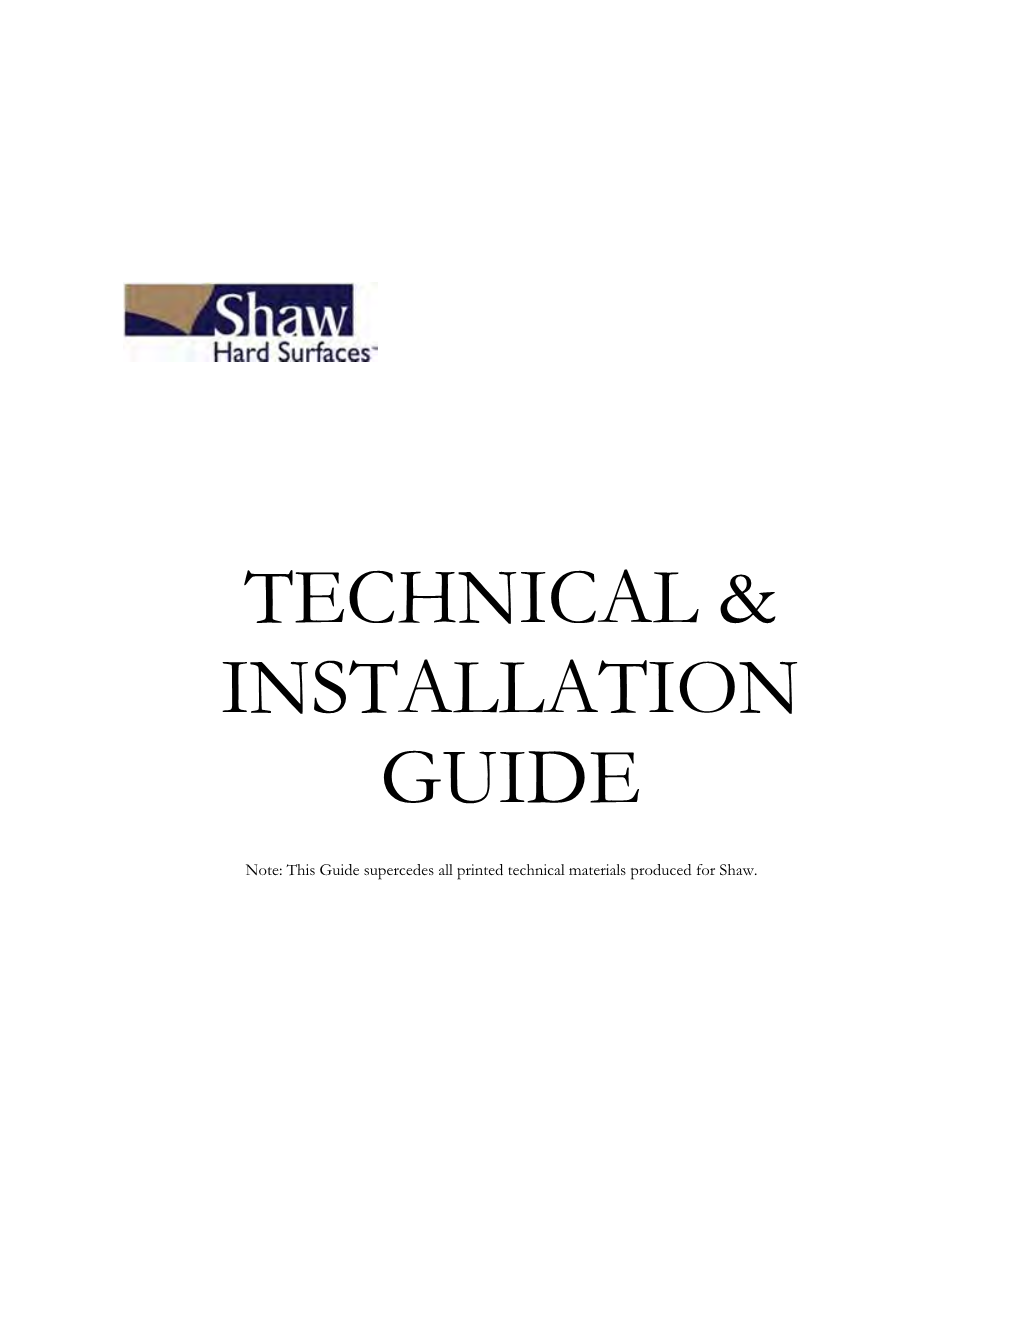 Technical & Installation Guide